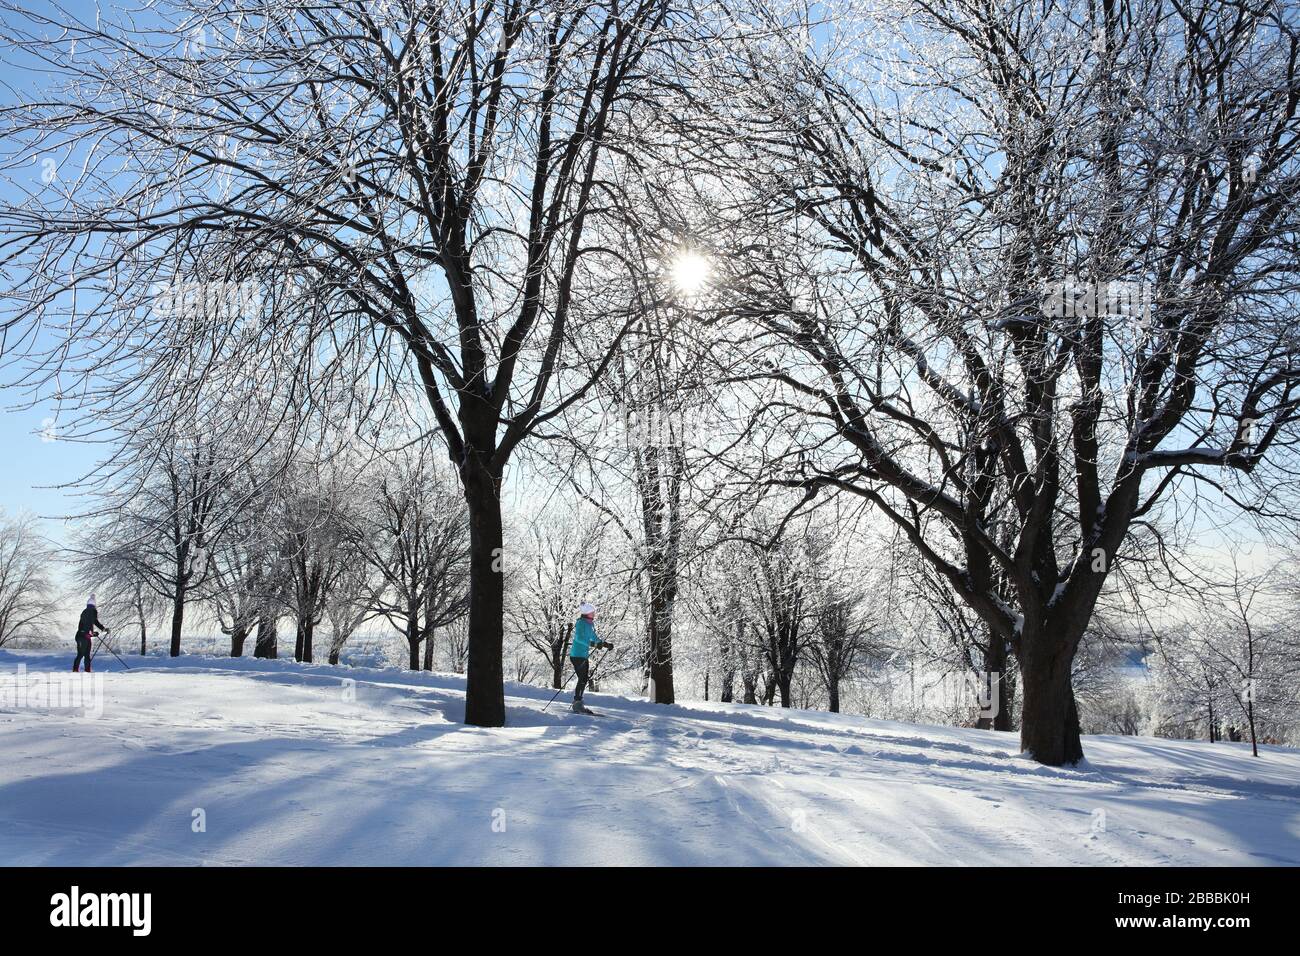 Cross-country skiers gliding beneath ice-coated trees in the Plains of Abraham Battefields Park, Quebec City, Quebec, Canada Stock Photo